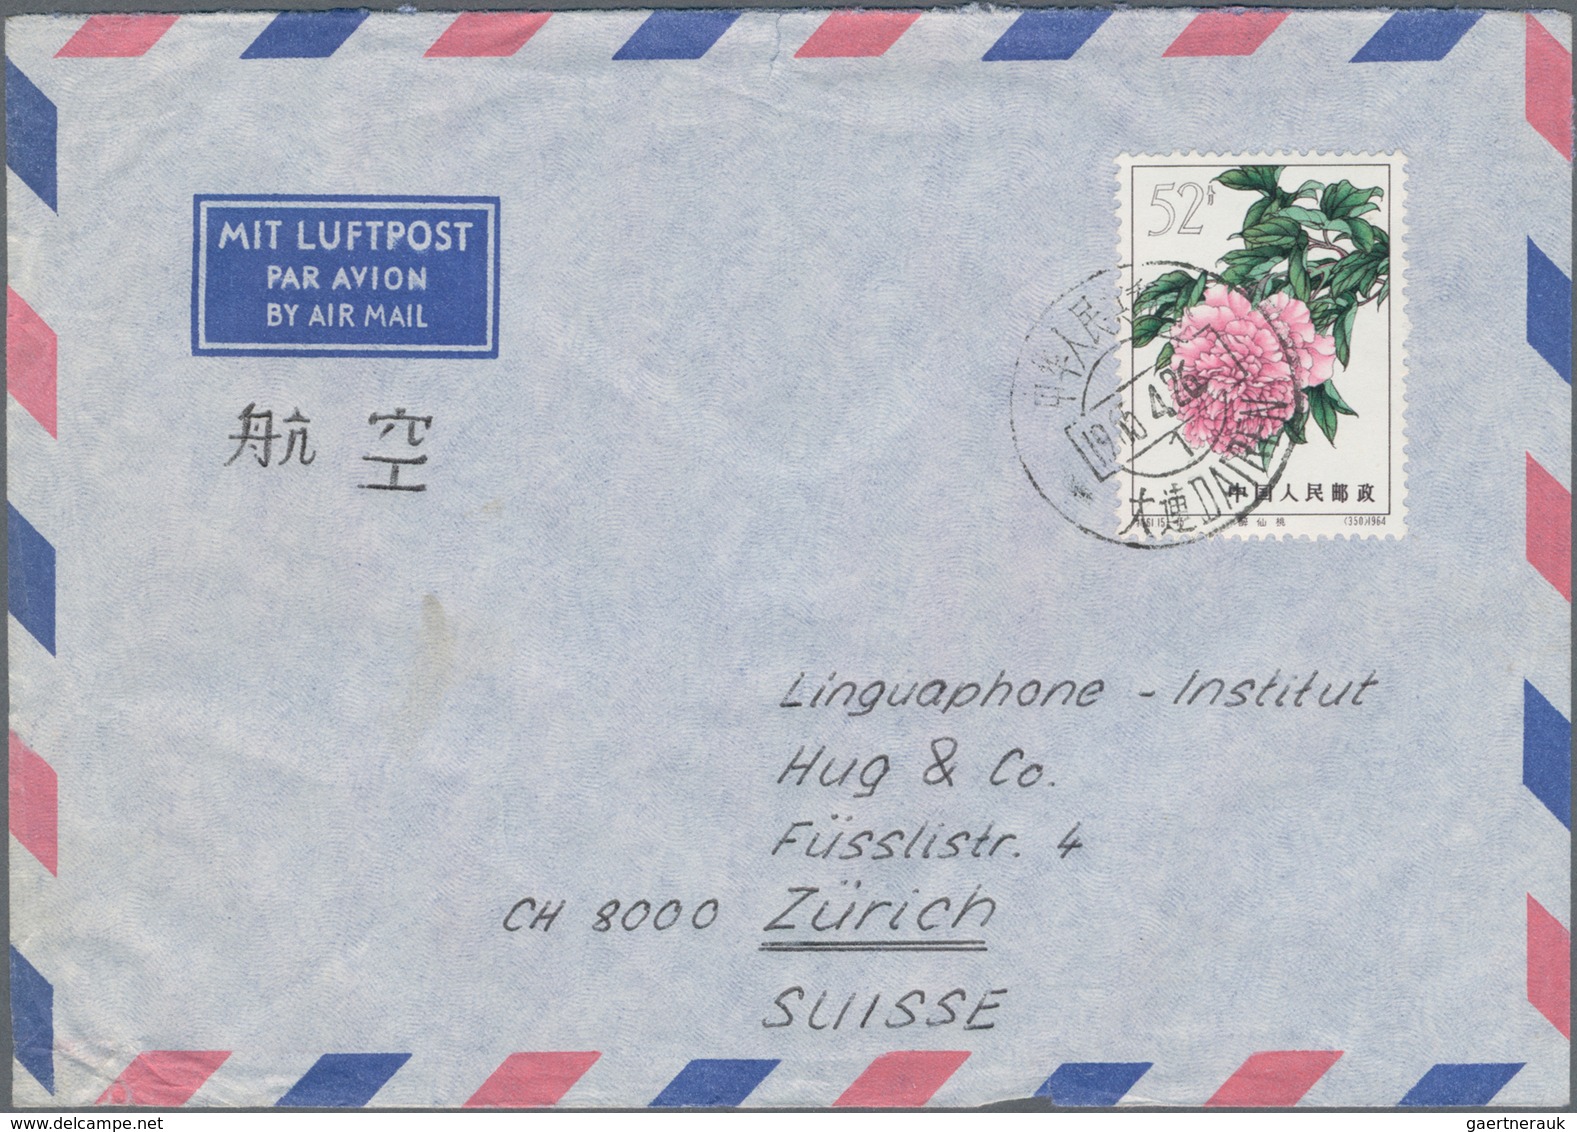 China - Volksrepublik: 1962/65, Covers (4 Inc. 1 Card) To Austria, USA 82) And Switzerland, The Lett - Covers & Documents